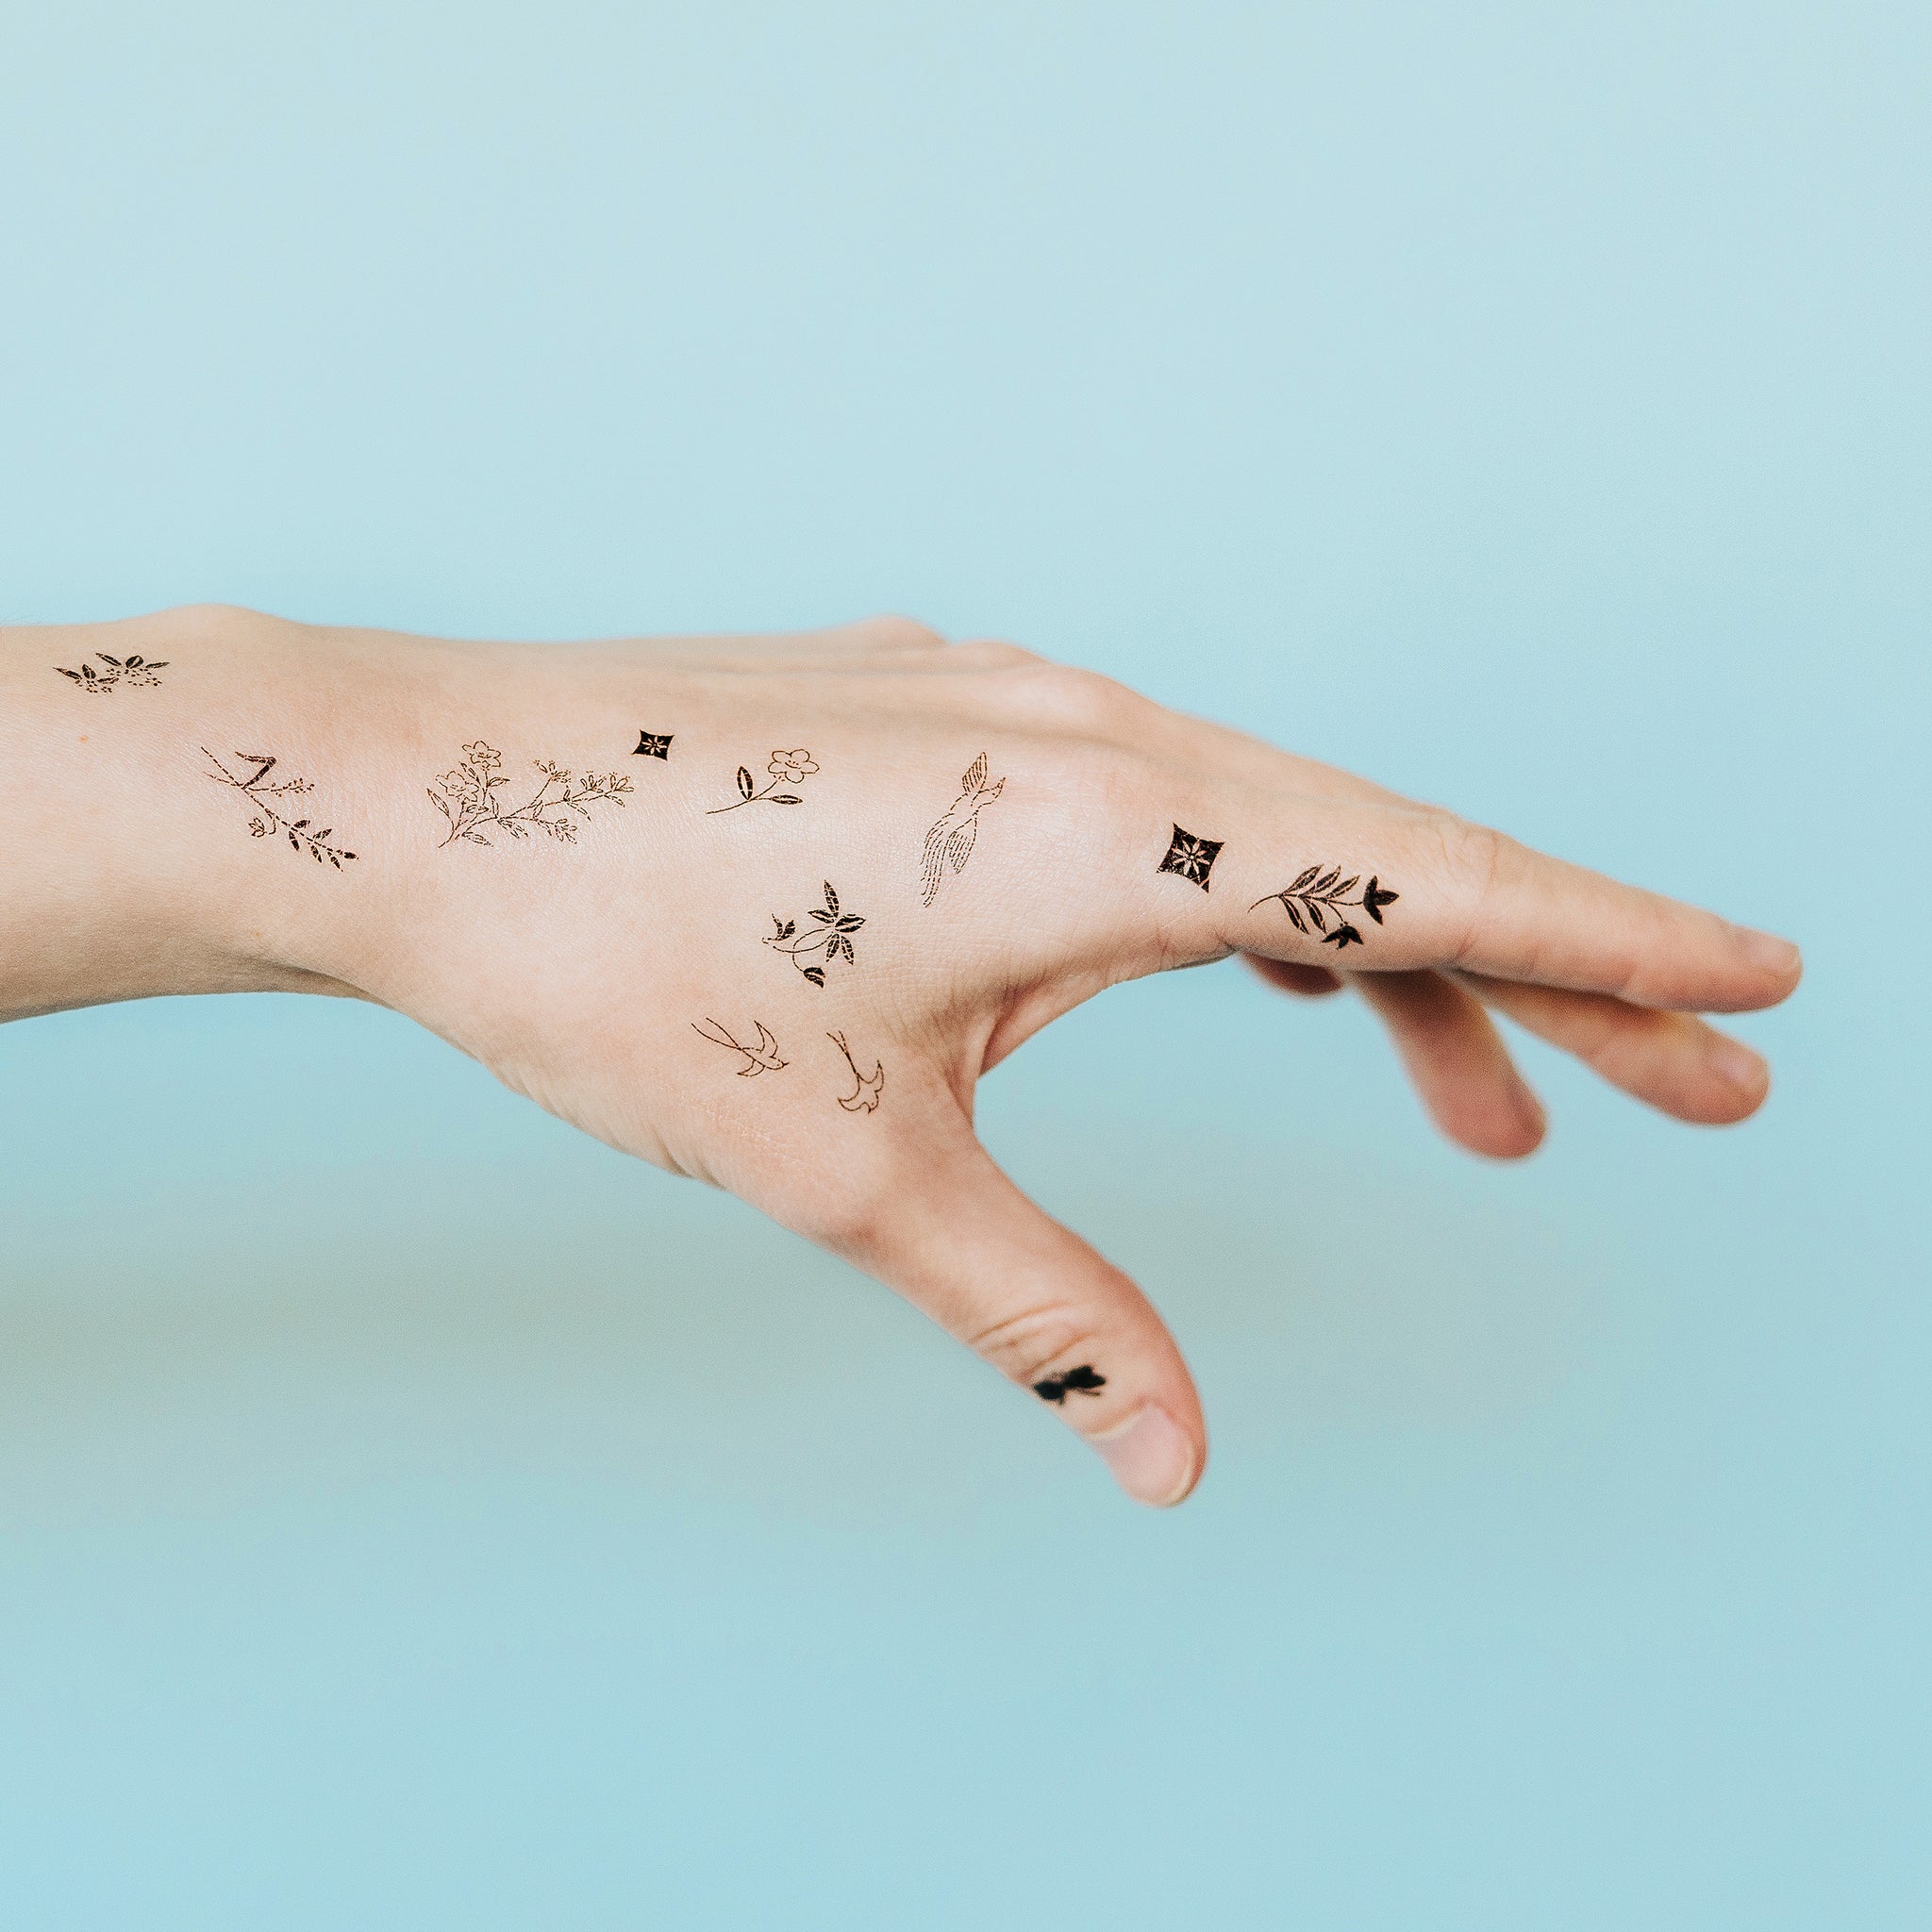 austin tott pairs tiny tattoos with parallel landscapes